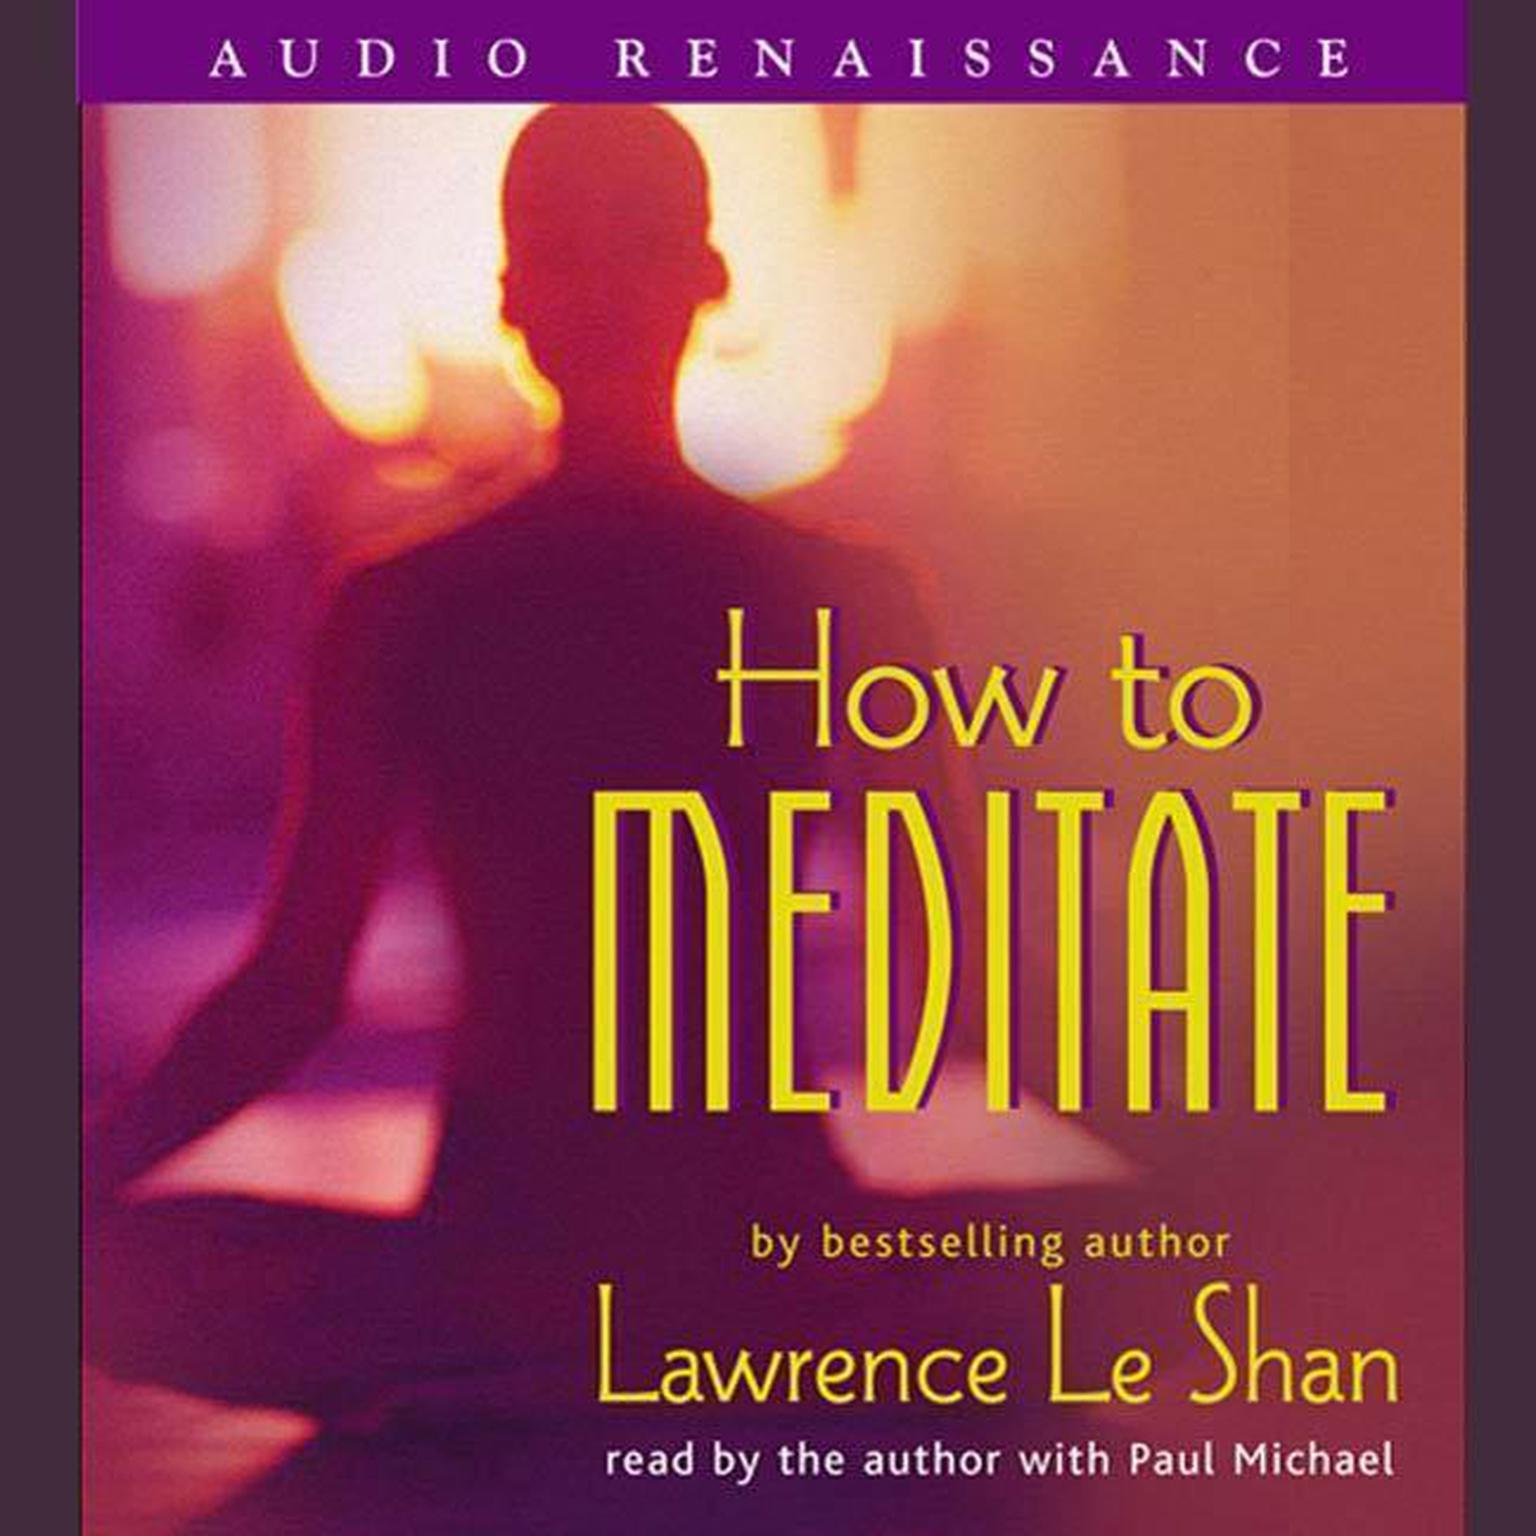 How to Meditate, Revised and Expanded (Abridged) Audiobook, by Lawrence LeShan